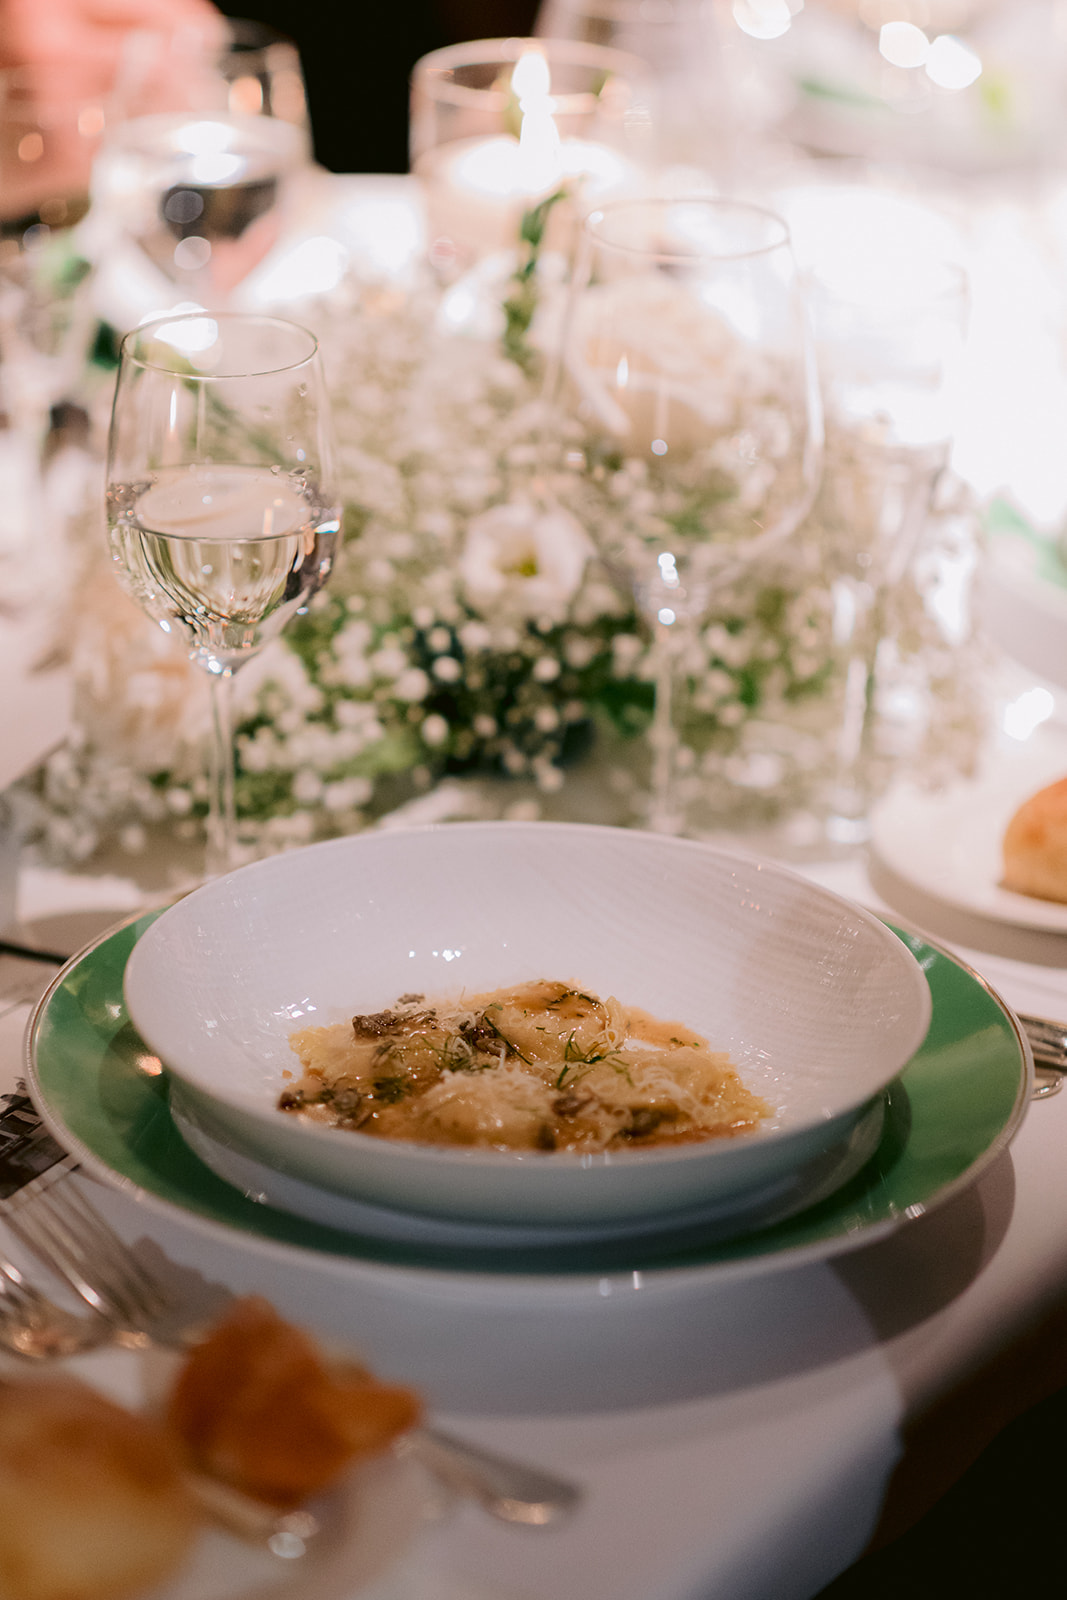 New York Wedding Venues with Exceptional Food Experience - The River Cafe, Brooklyn - Larisa Shorina Photography - Luxury Destination Weddings